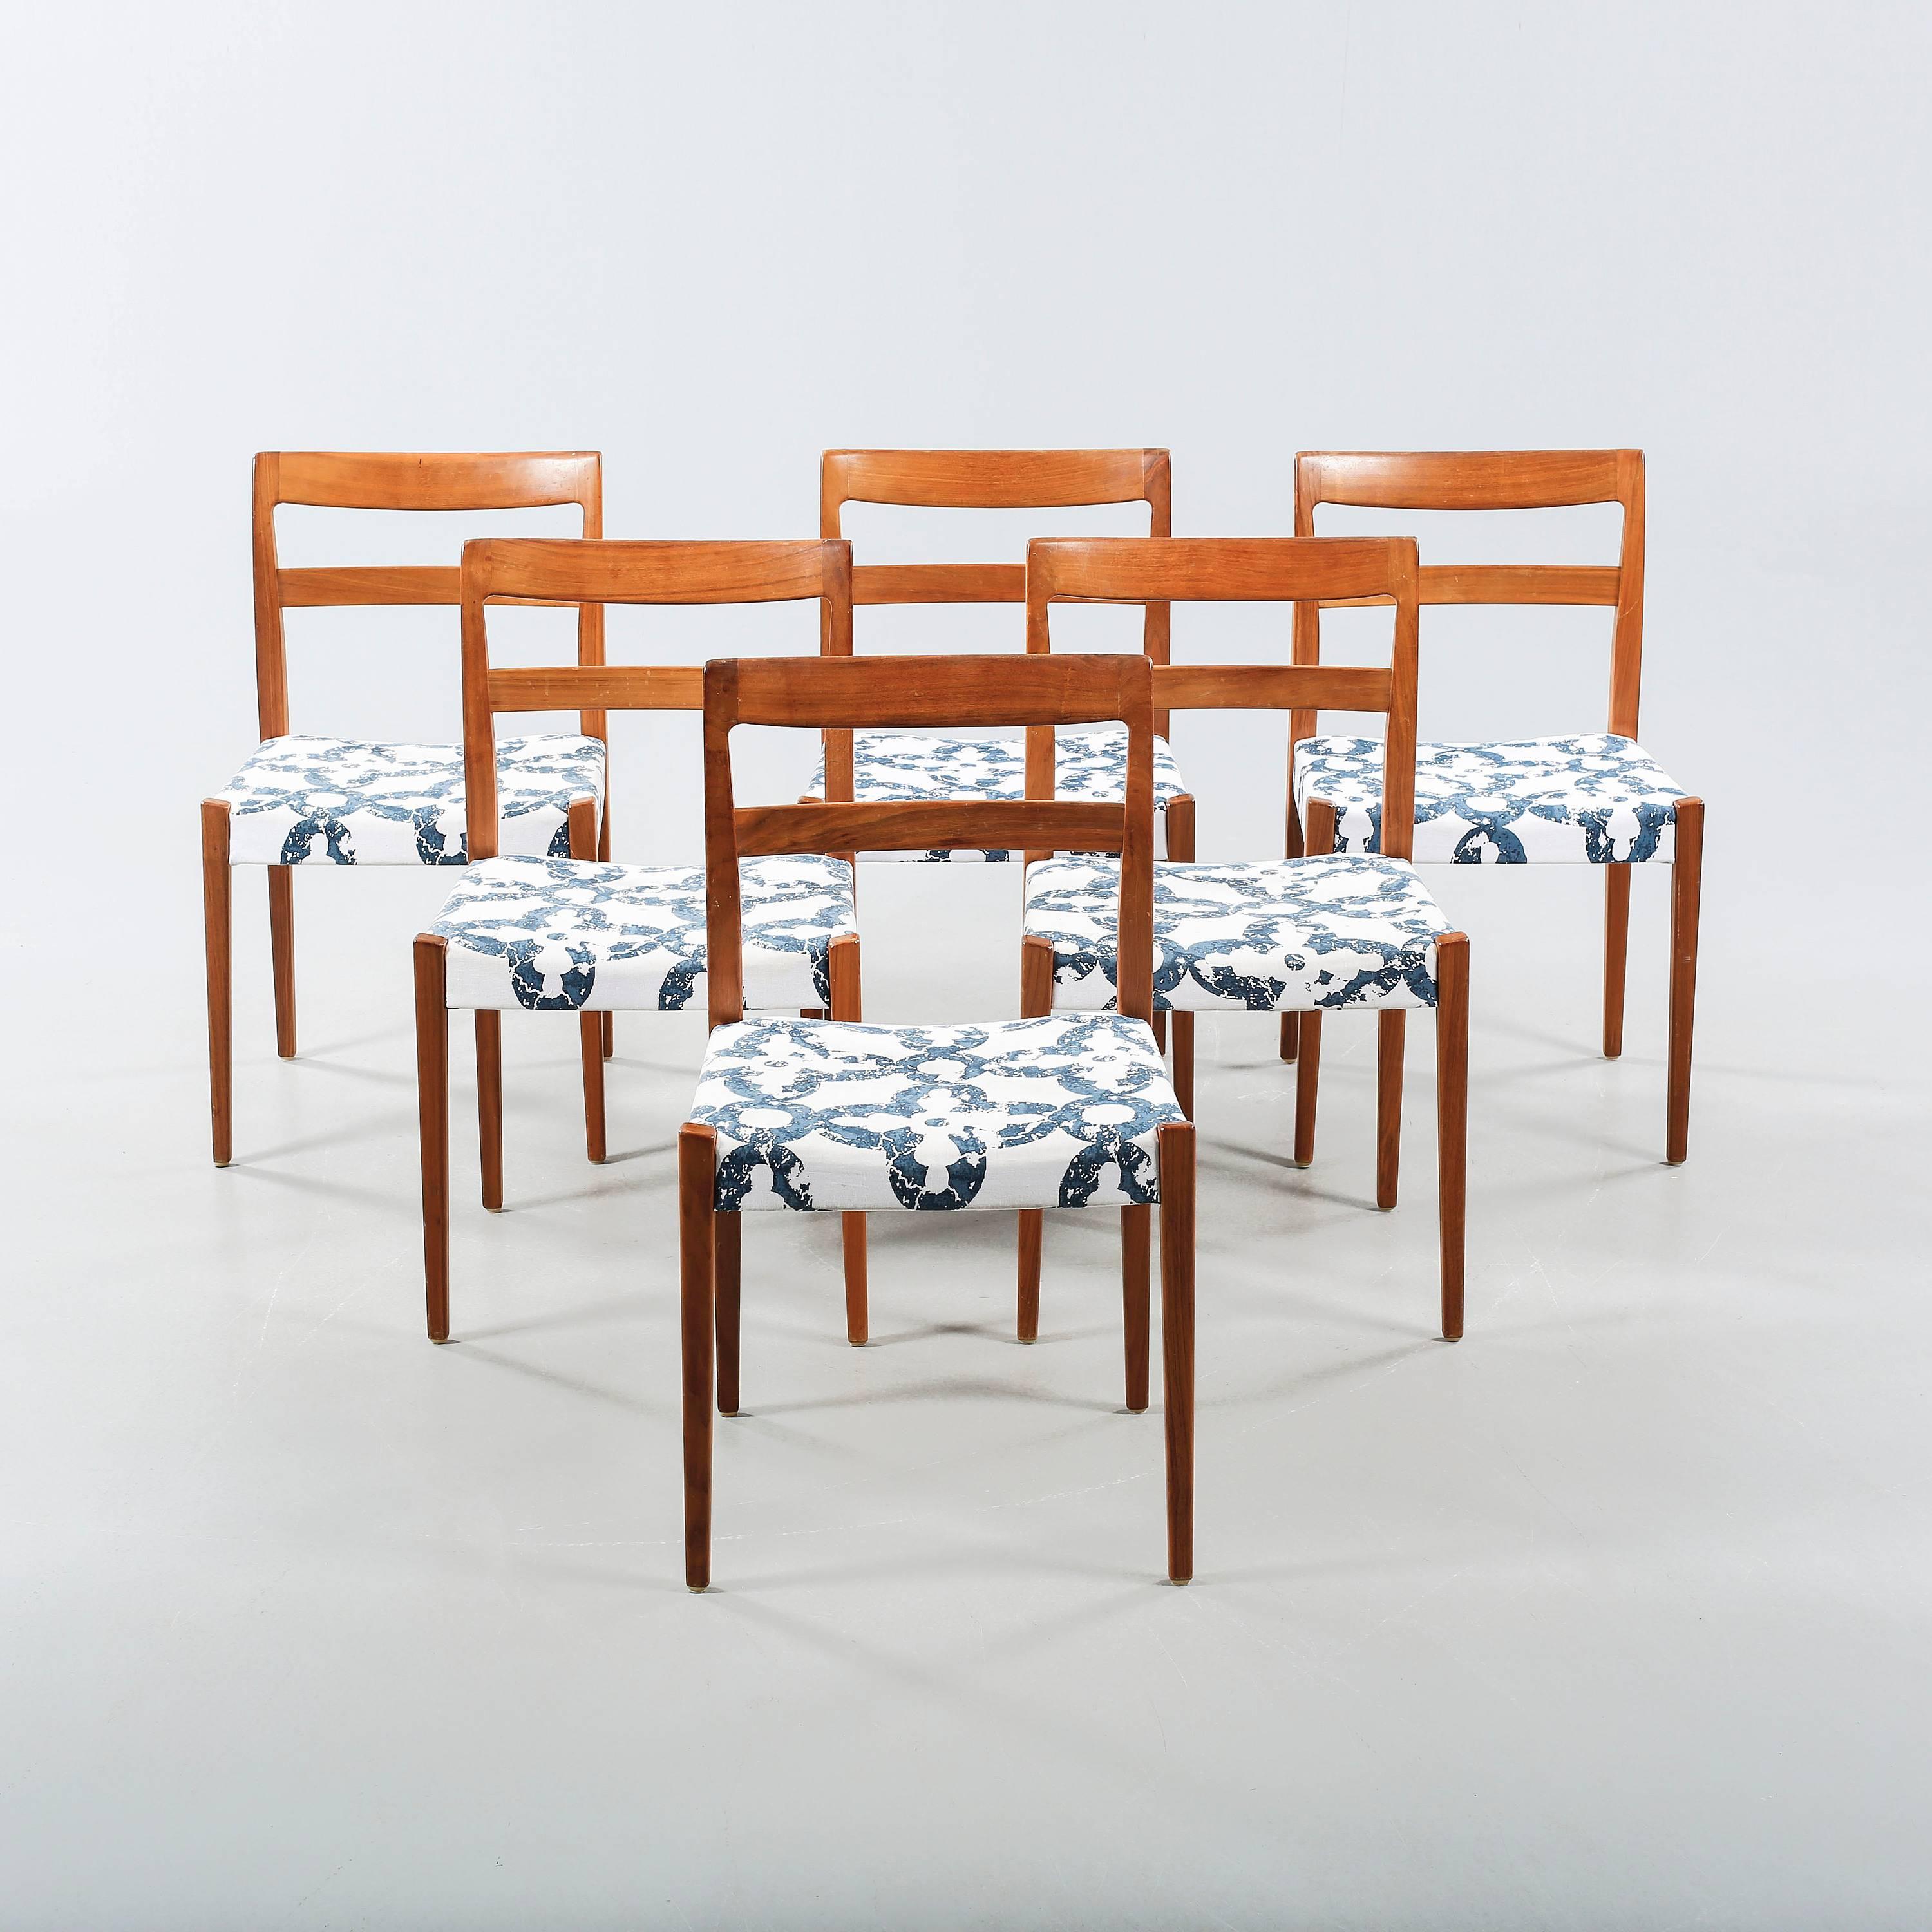 Set of six walnut chairs designed by Nils Jonsson for Troeds, Bjärnum in the 1960s. Original condition.